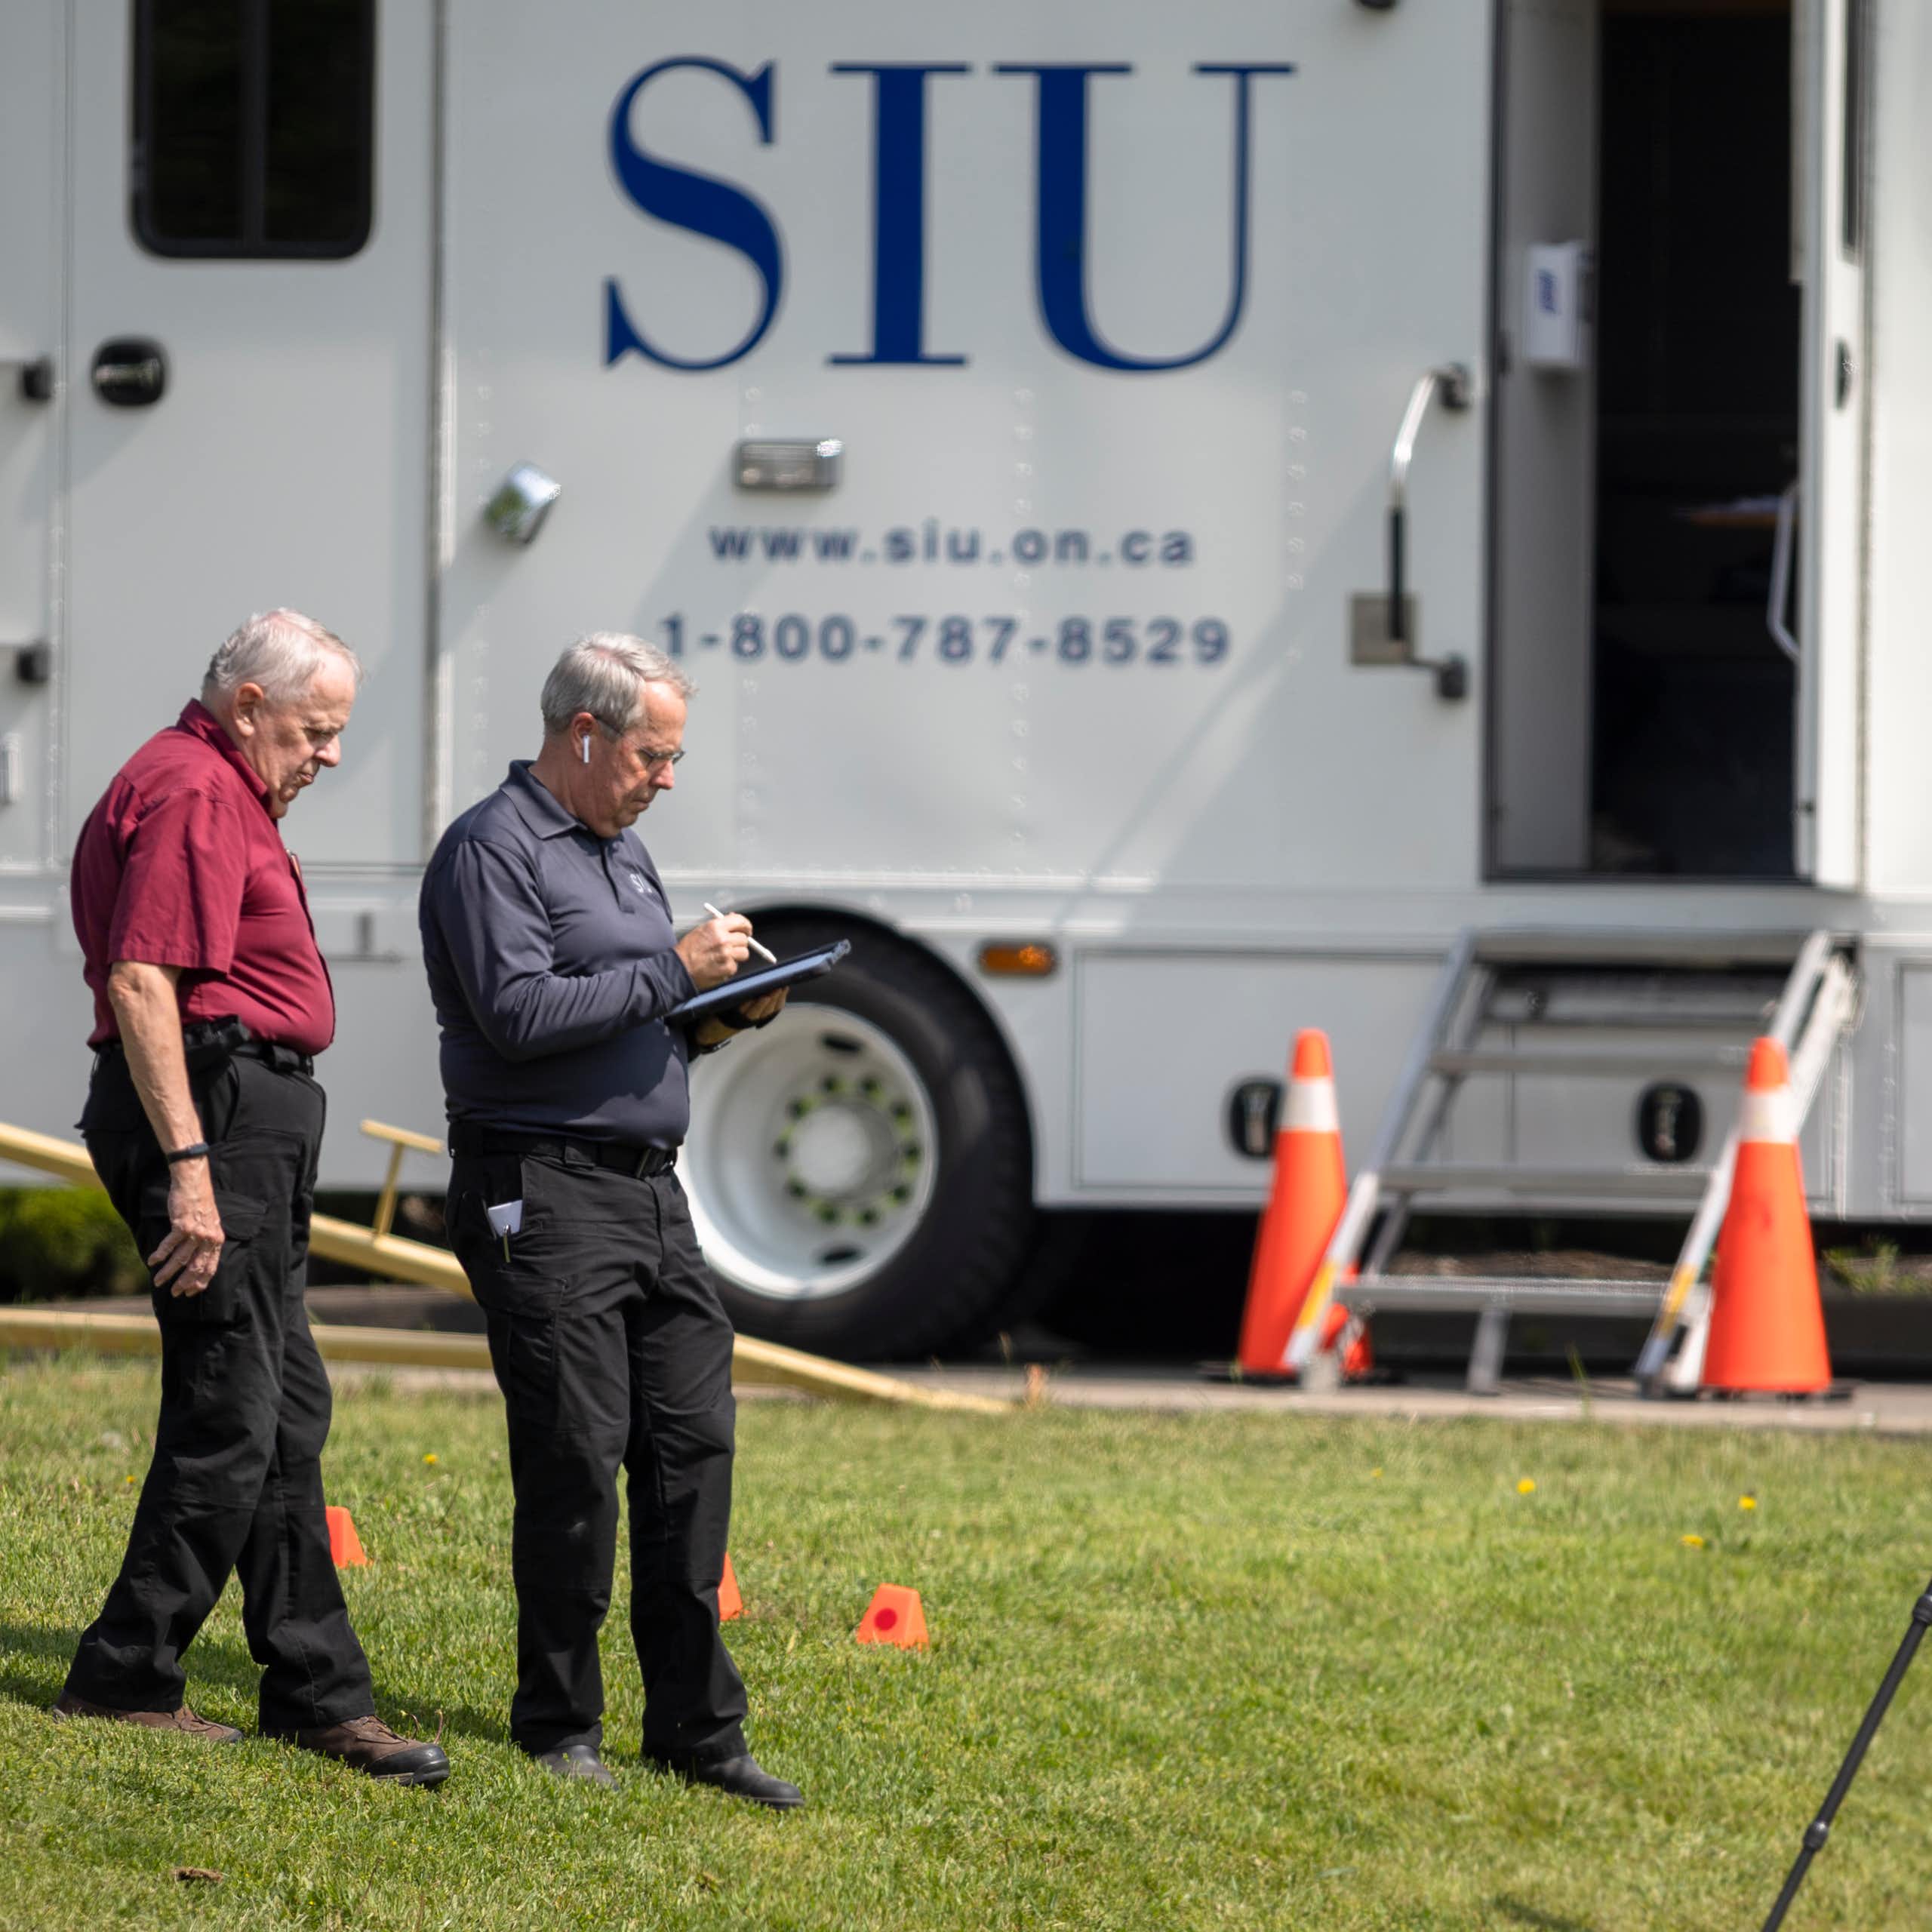 Two older men stand on a grassy area. A truck with the letters SIU on it is behind them